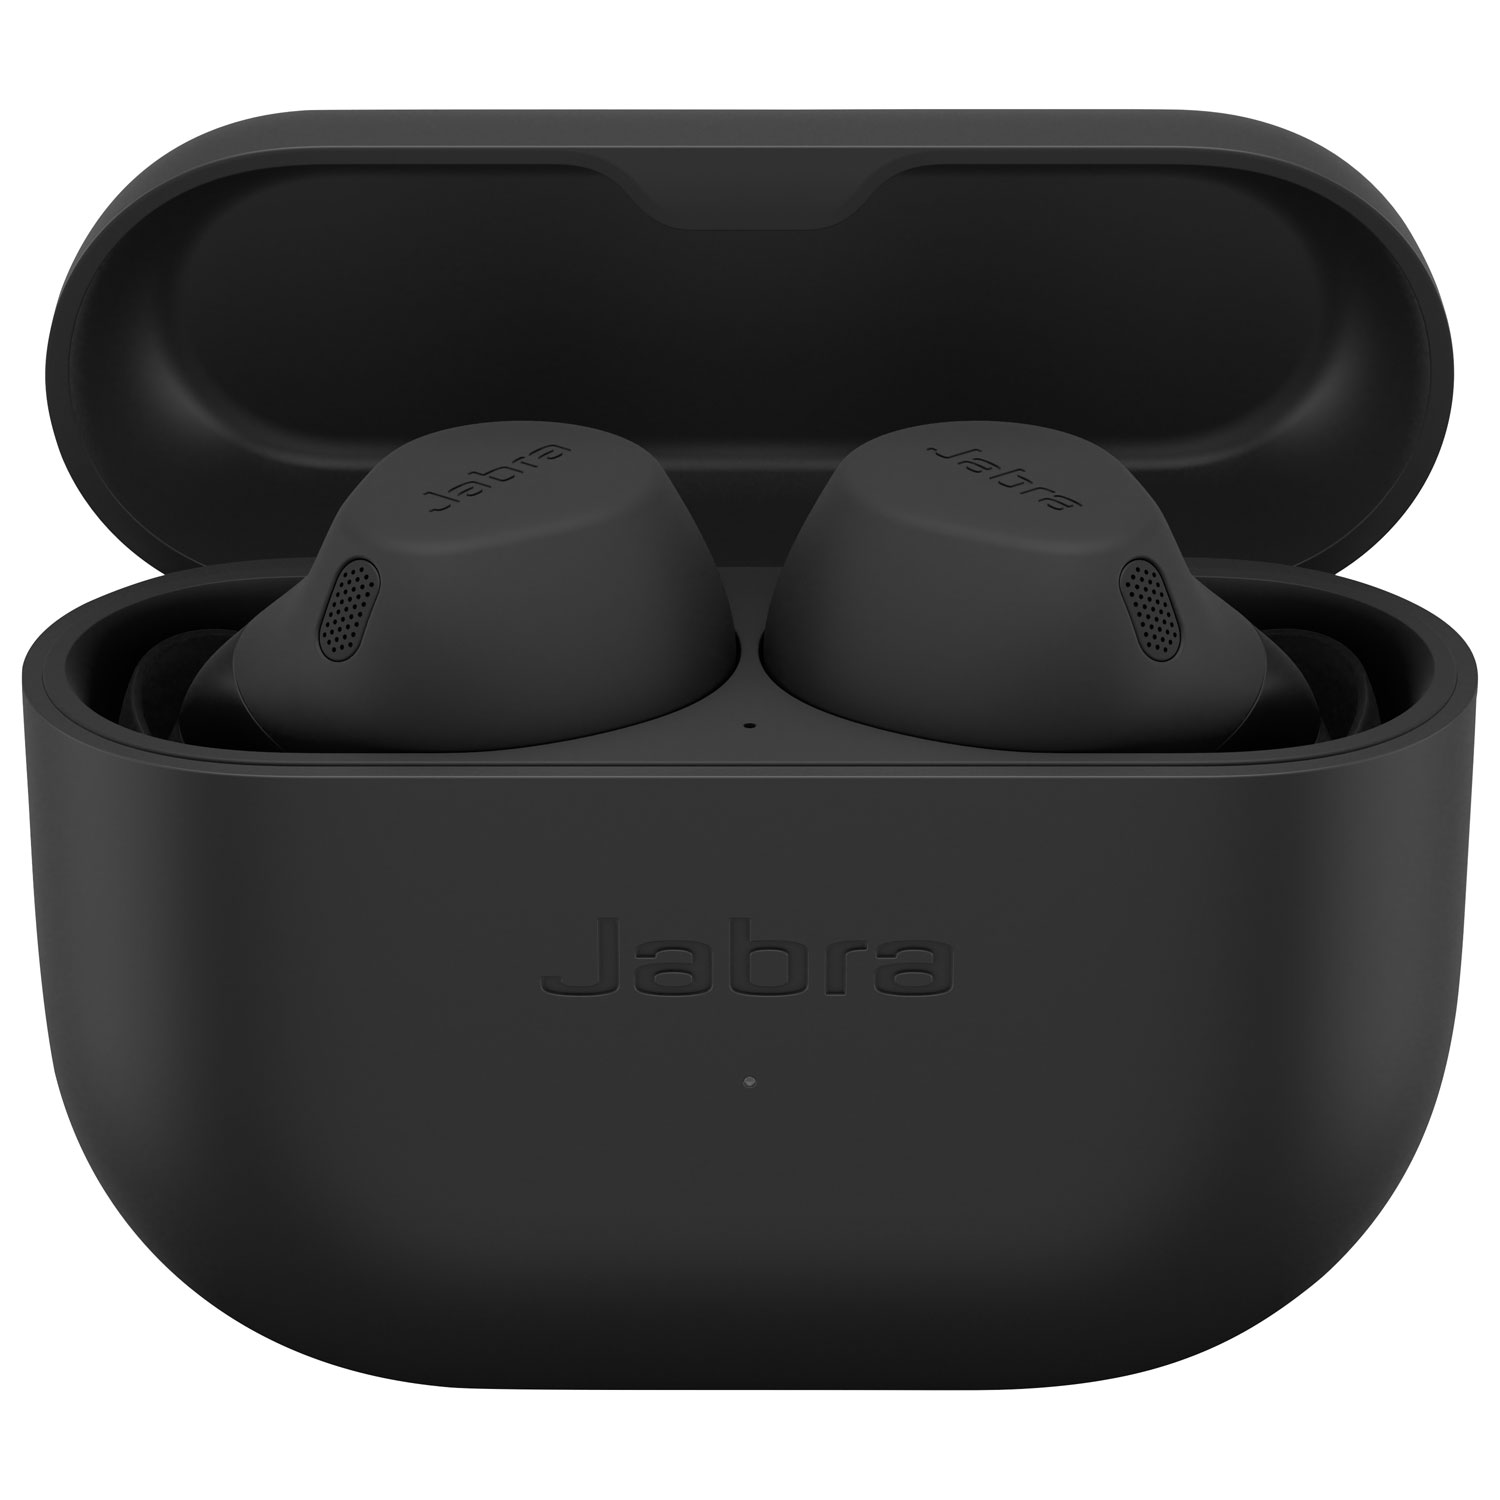 Jabra Elite 8 Active In-Ear Noise Cancelling True Wireless Earbuds - Black - Only at Best Buy